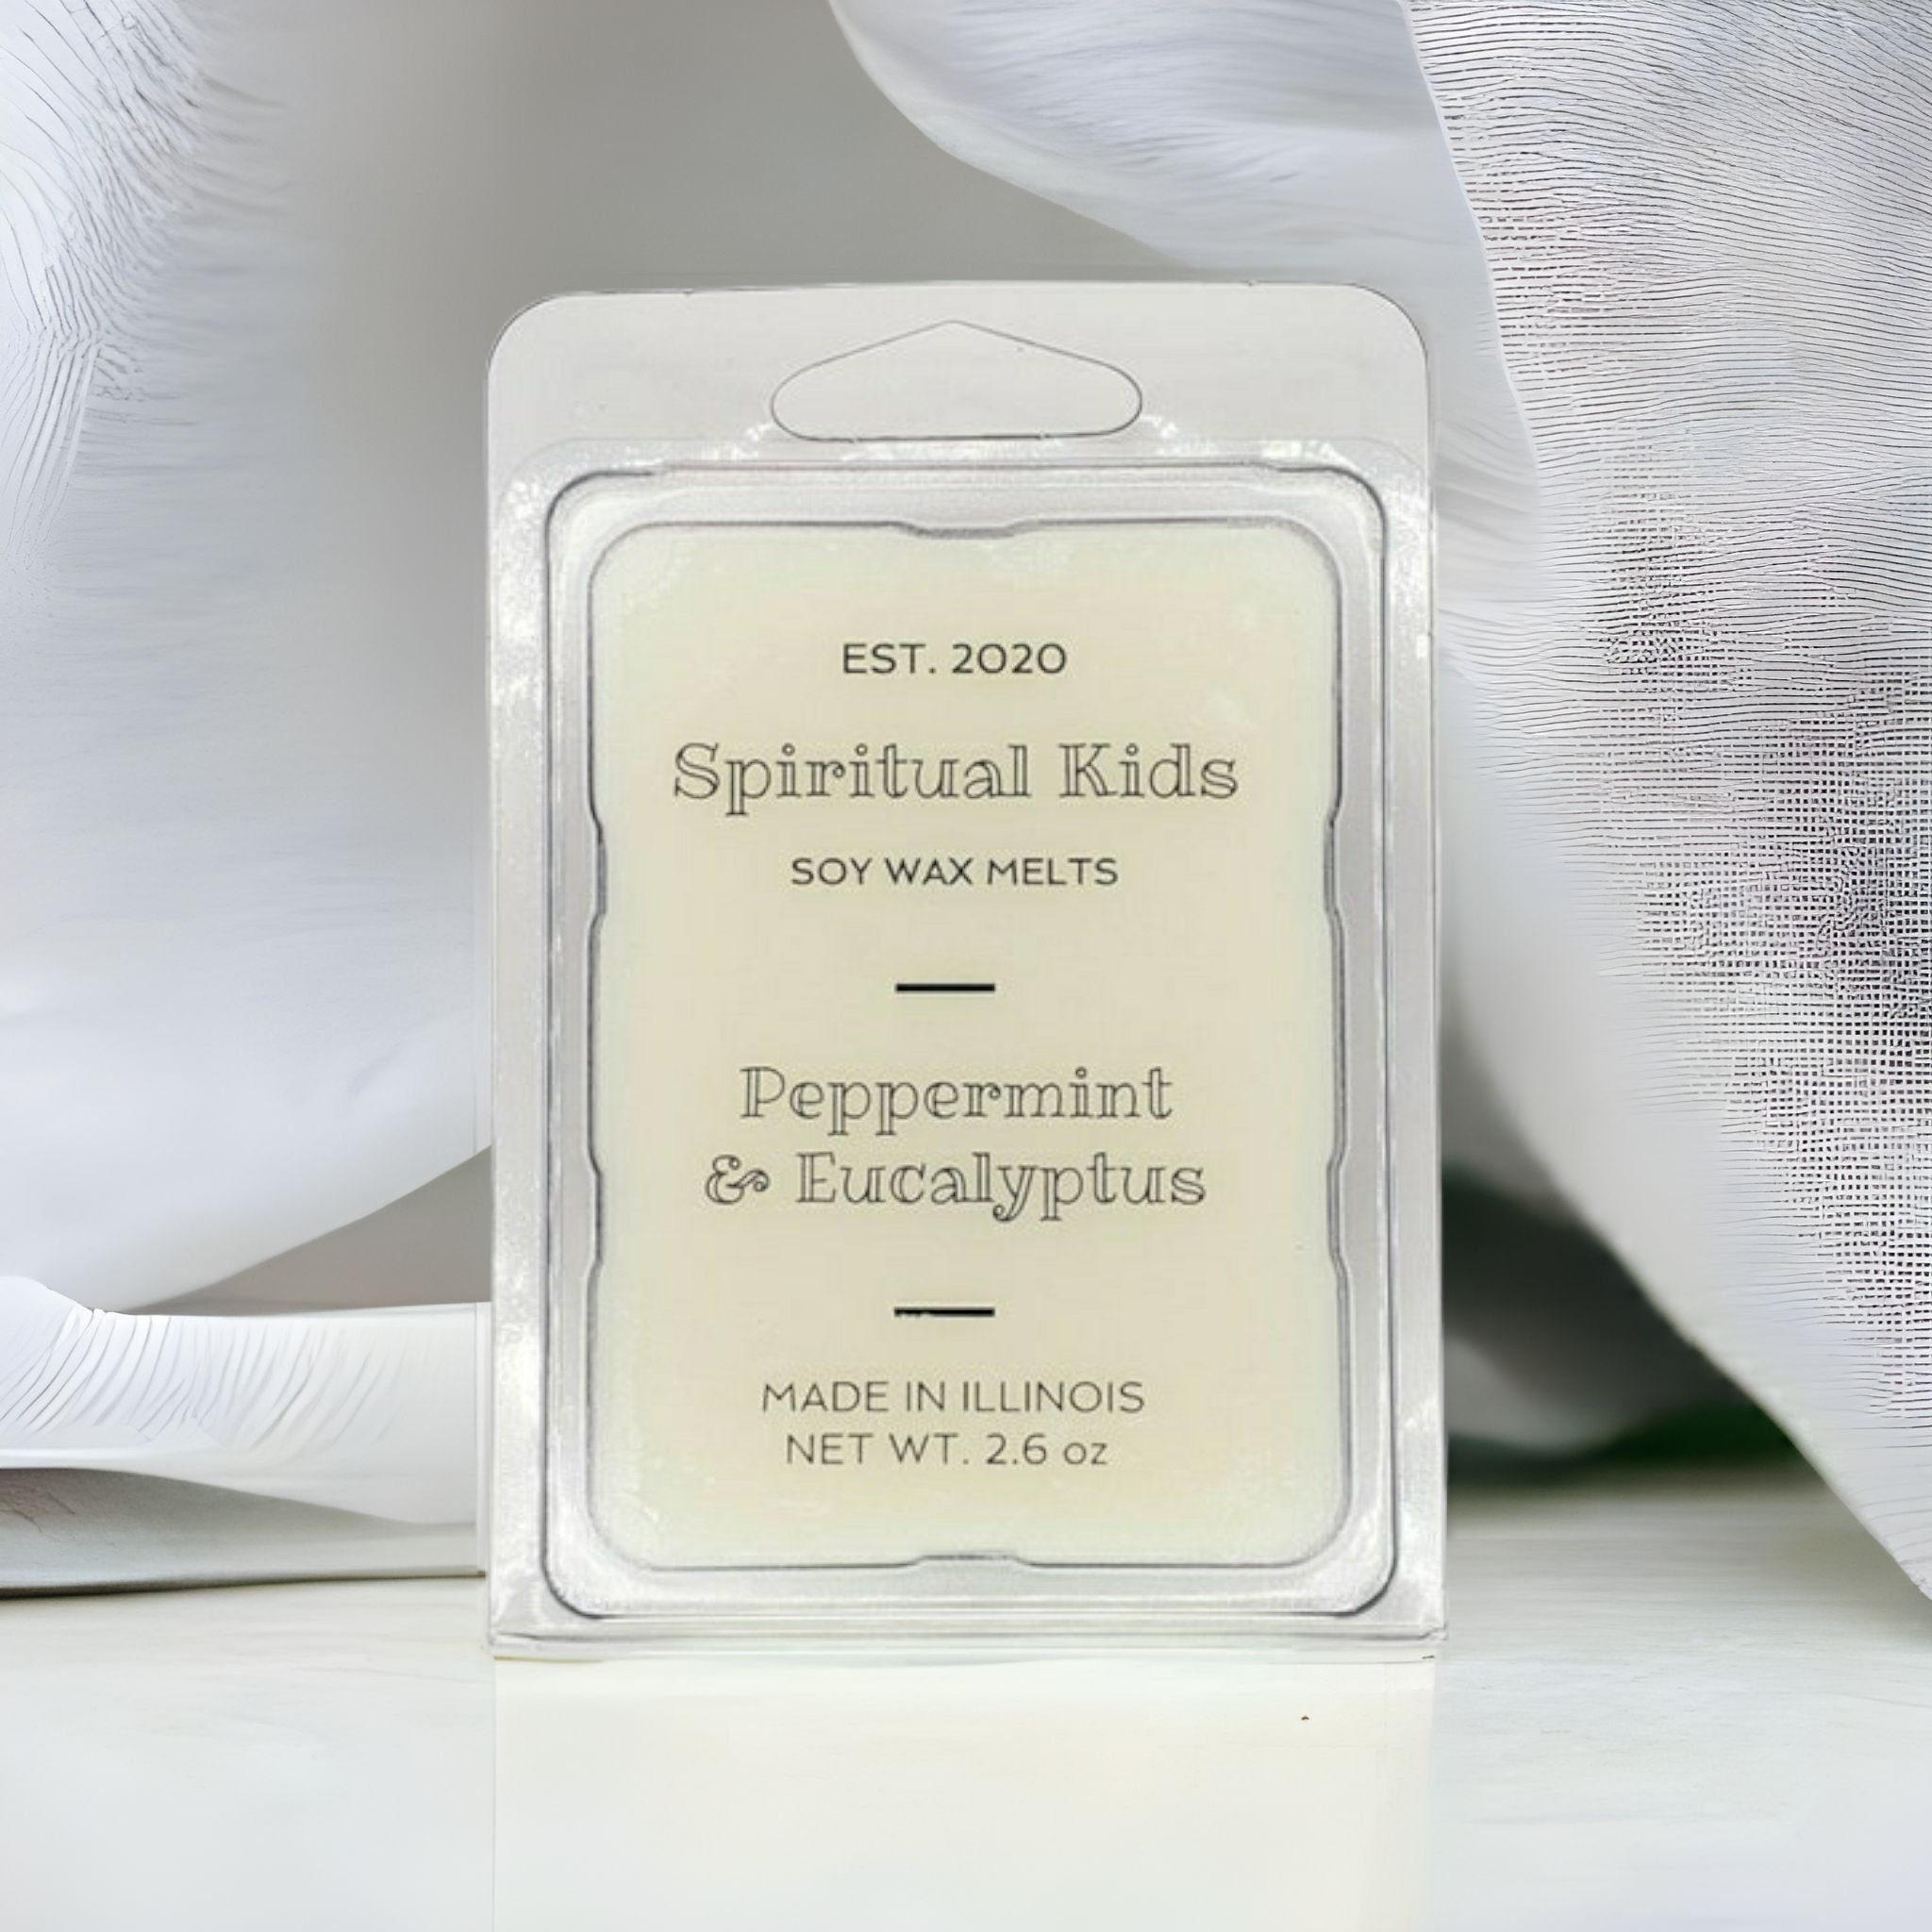 Peppermint & Eucalyptus 2.6oz All Natural Soy Wax Melts 6ct Hand Poured  with Fragrant/Essential Oils!